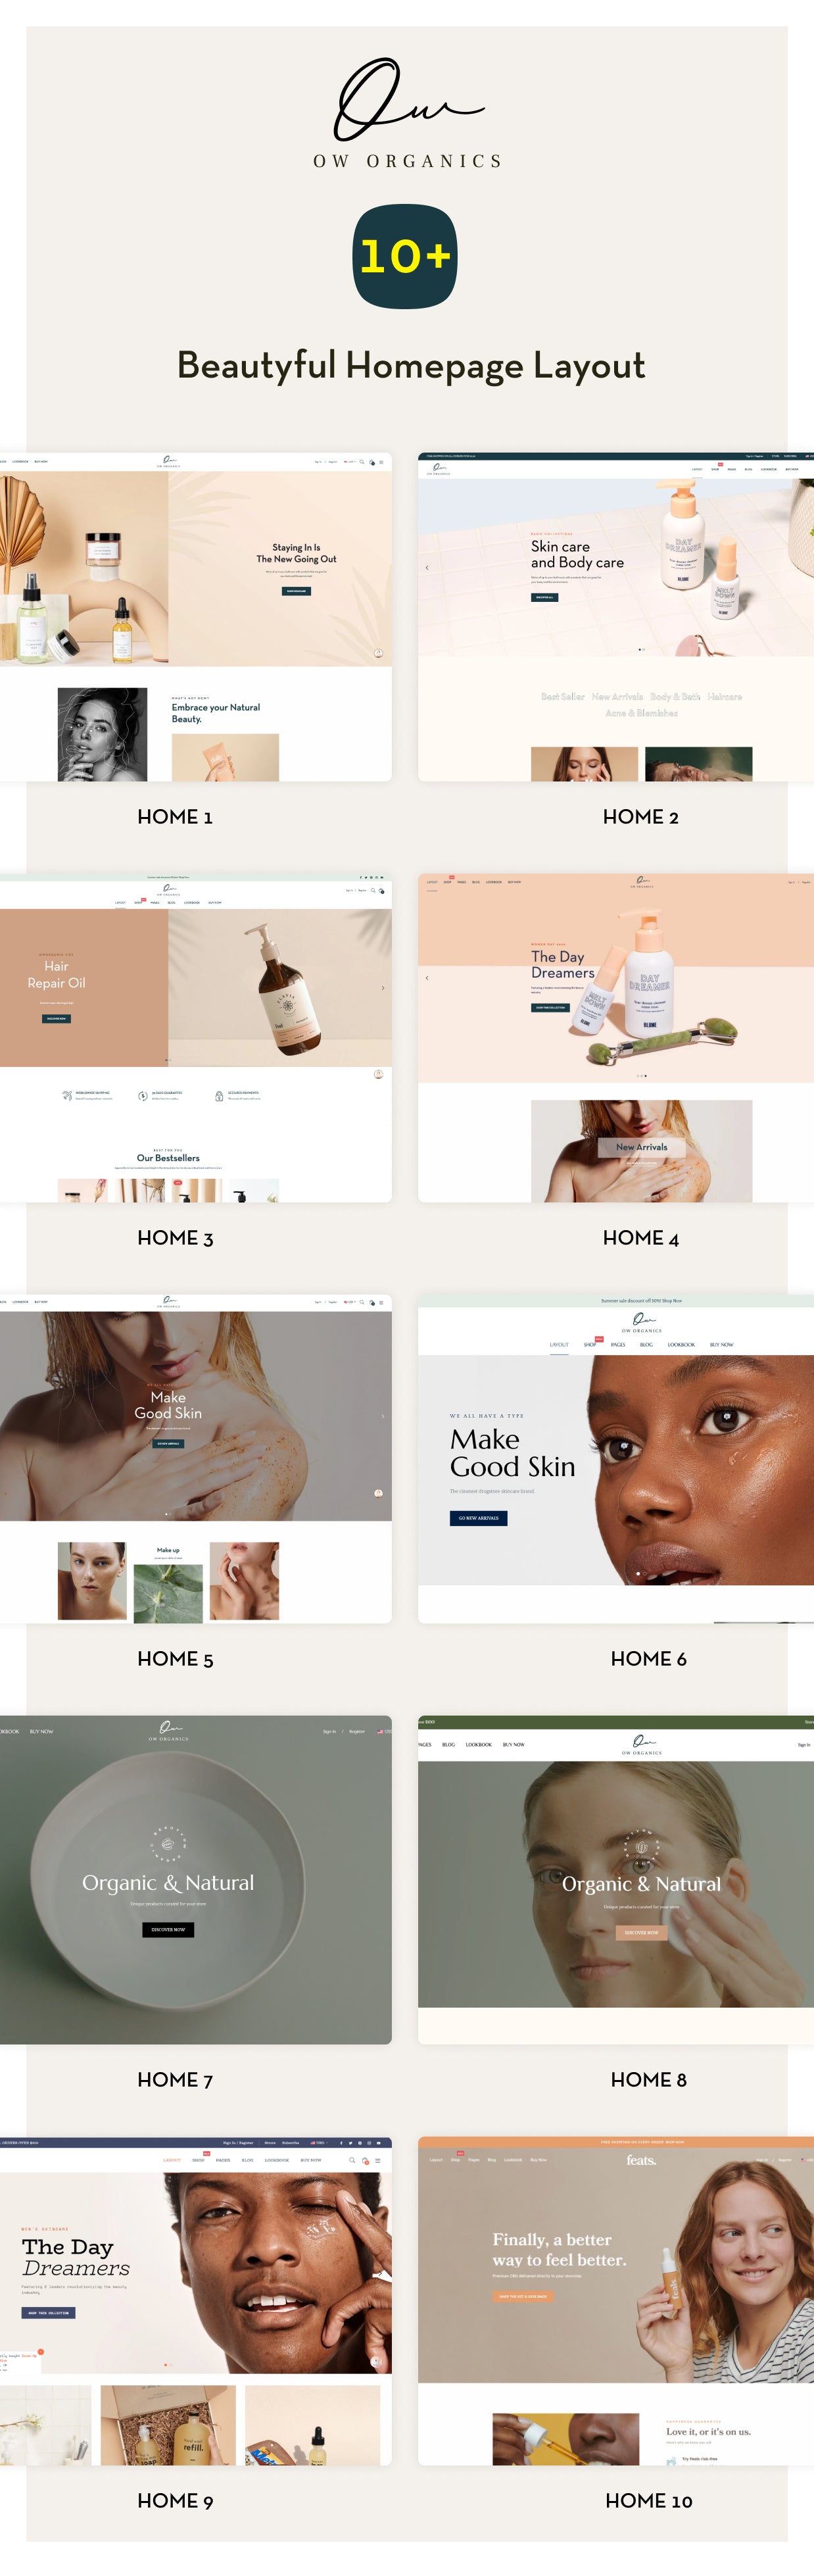 intro - Oworganic - Multipurpose Sections Shopify Theme